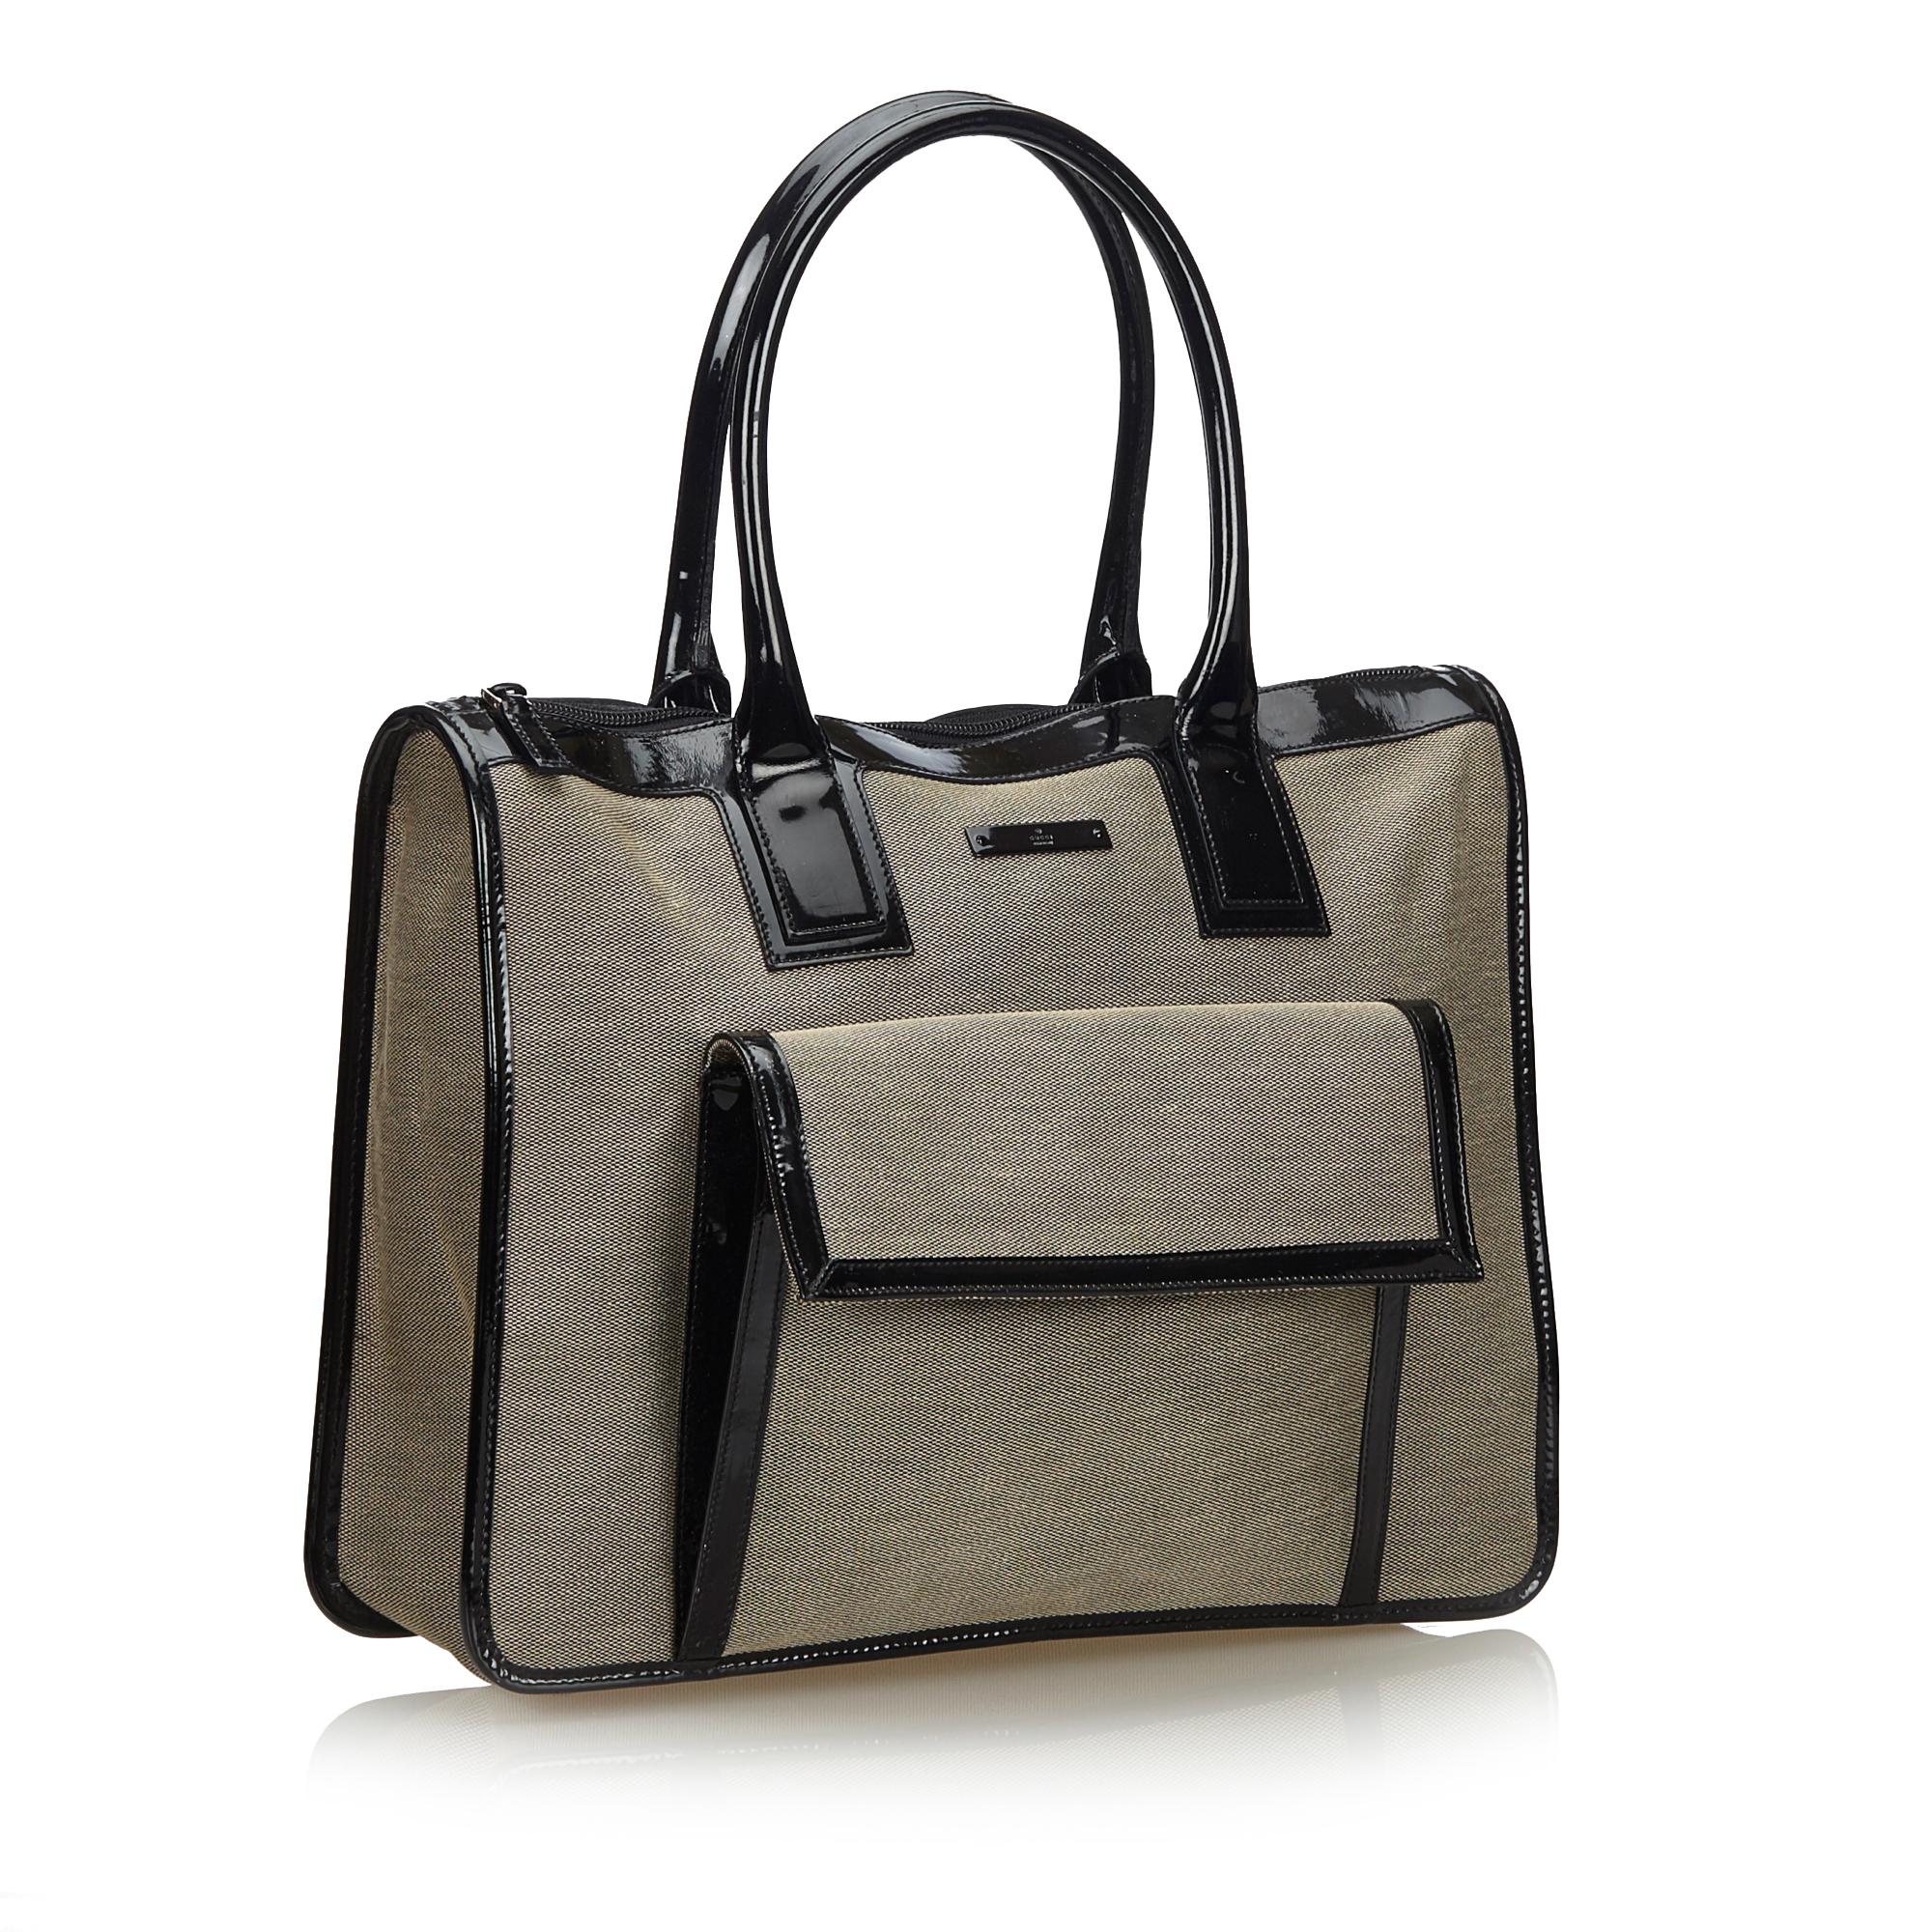 This handbag features a canvas body with patent leather trim, a front exterior flap pocket, rolled leather handles, a top zip closure, and an interior zip pocket. It carries as B+ condition rating.

Inclusions: 
This item does not come with